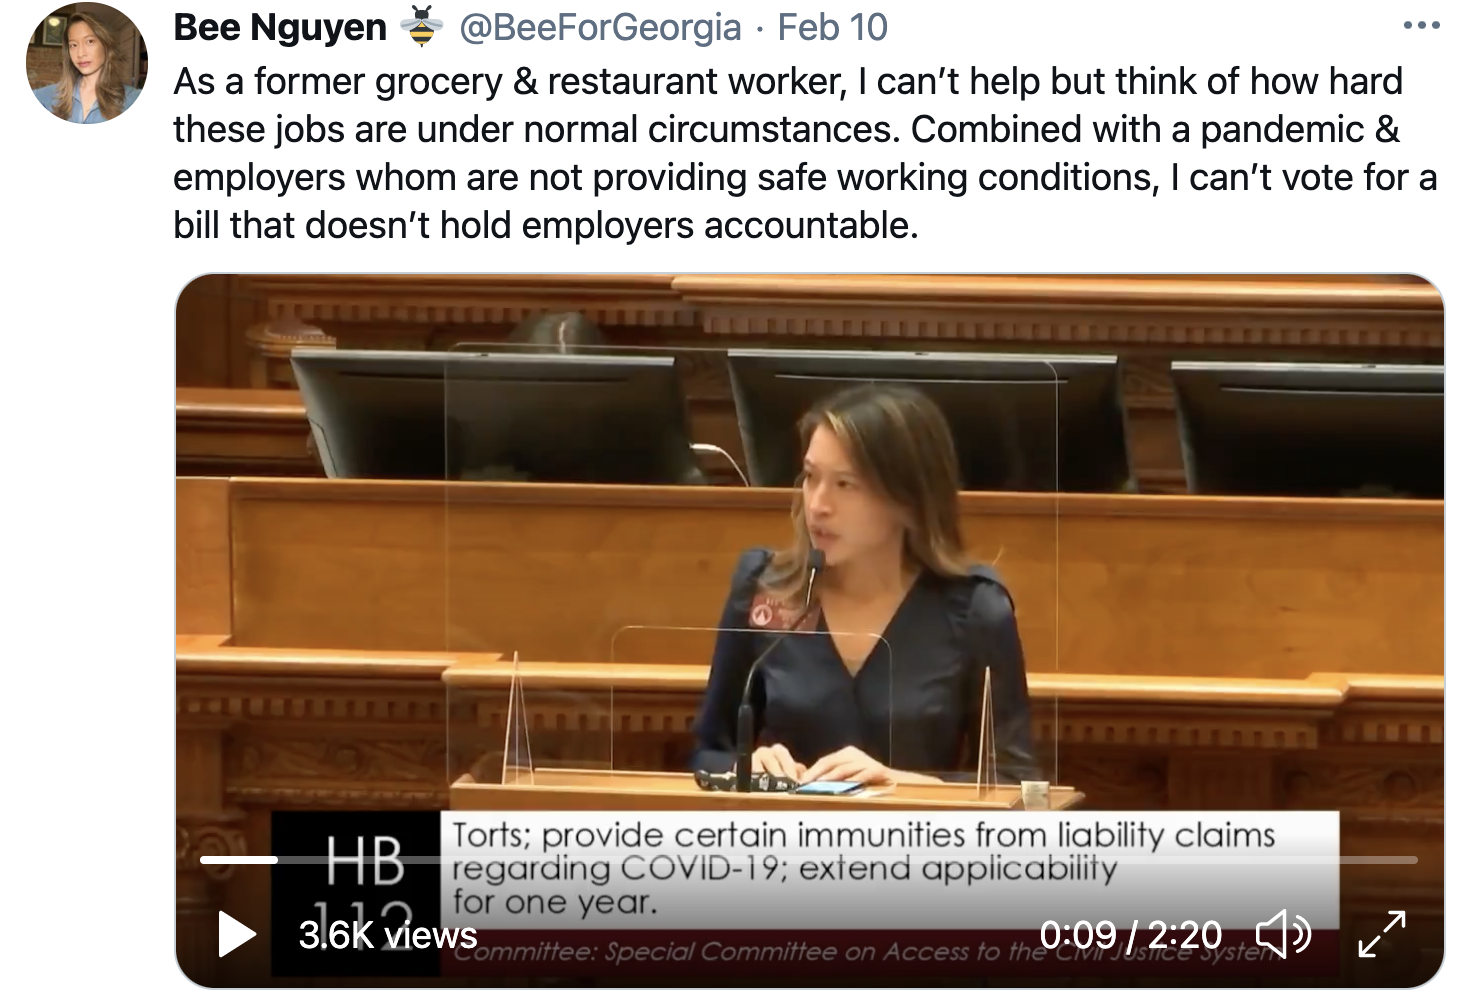 Bee Nguyen: As a former grocery & restaurant worker, I can't help but think of how hard these jobs are under normal circumstances. Combined with a pandemic & employers whom are not providing safe working conditions, I can't vote for a bill that doesn't hold employers accountable.